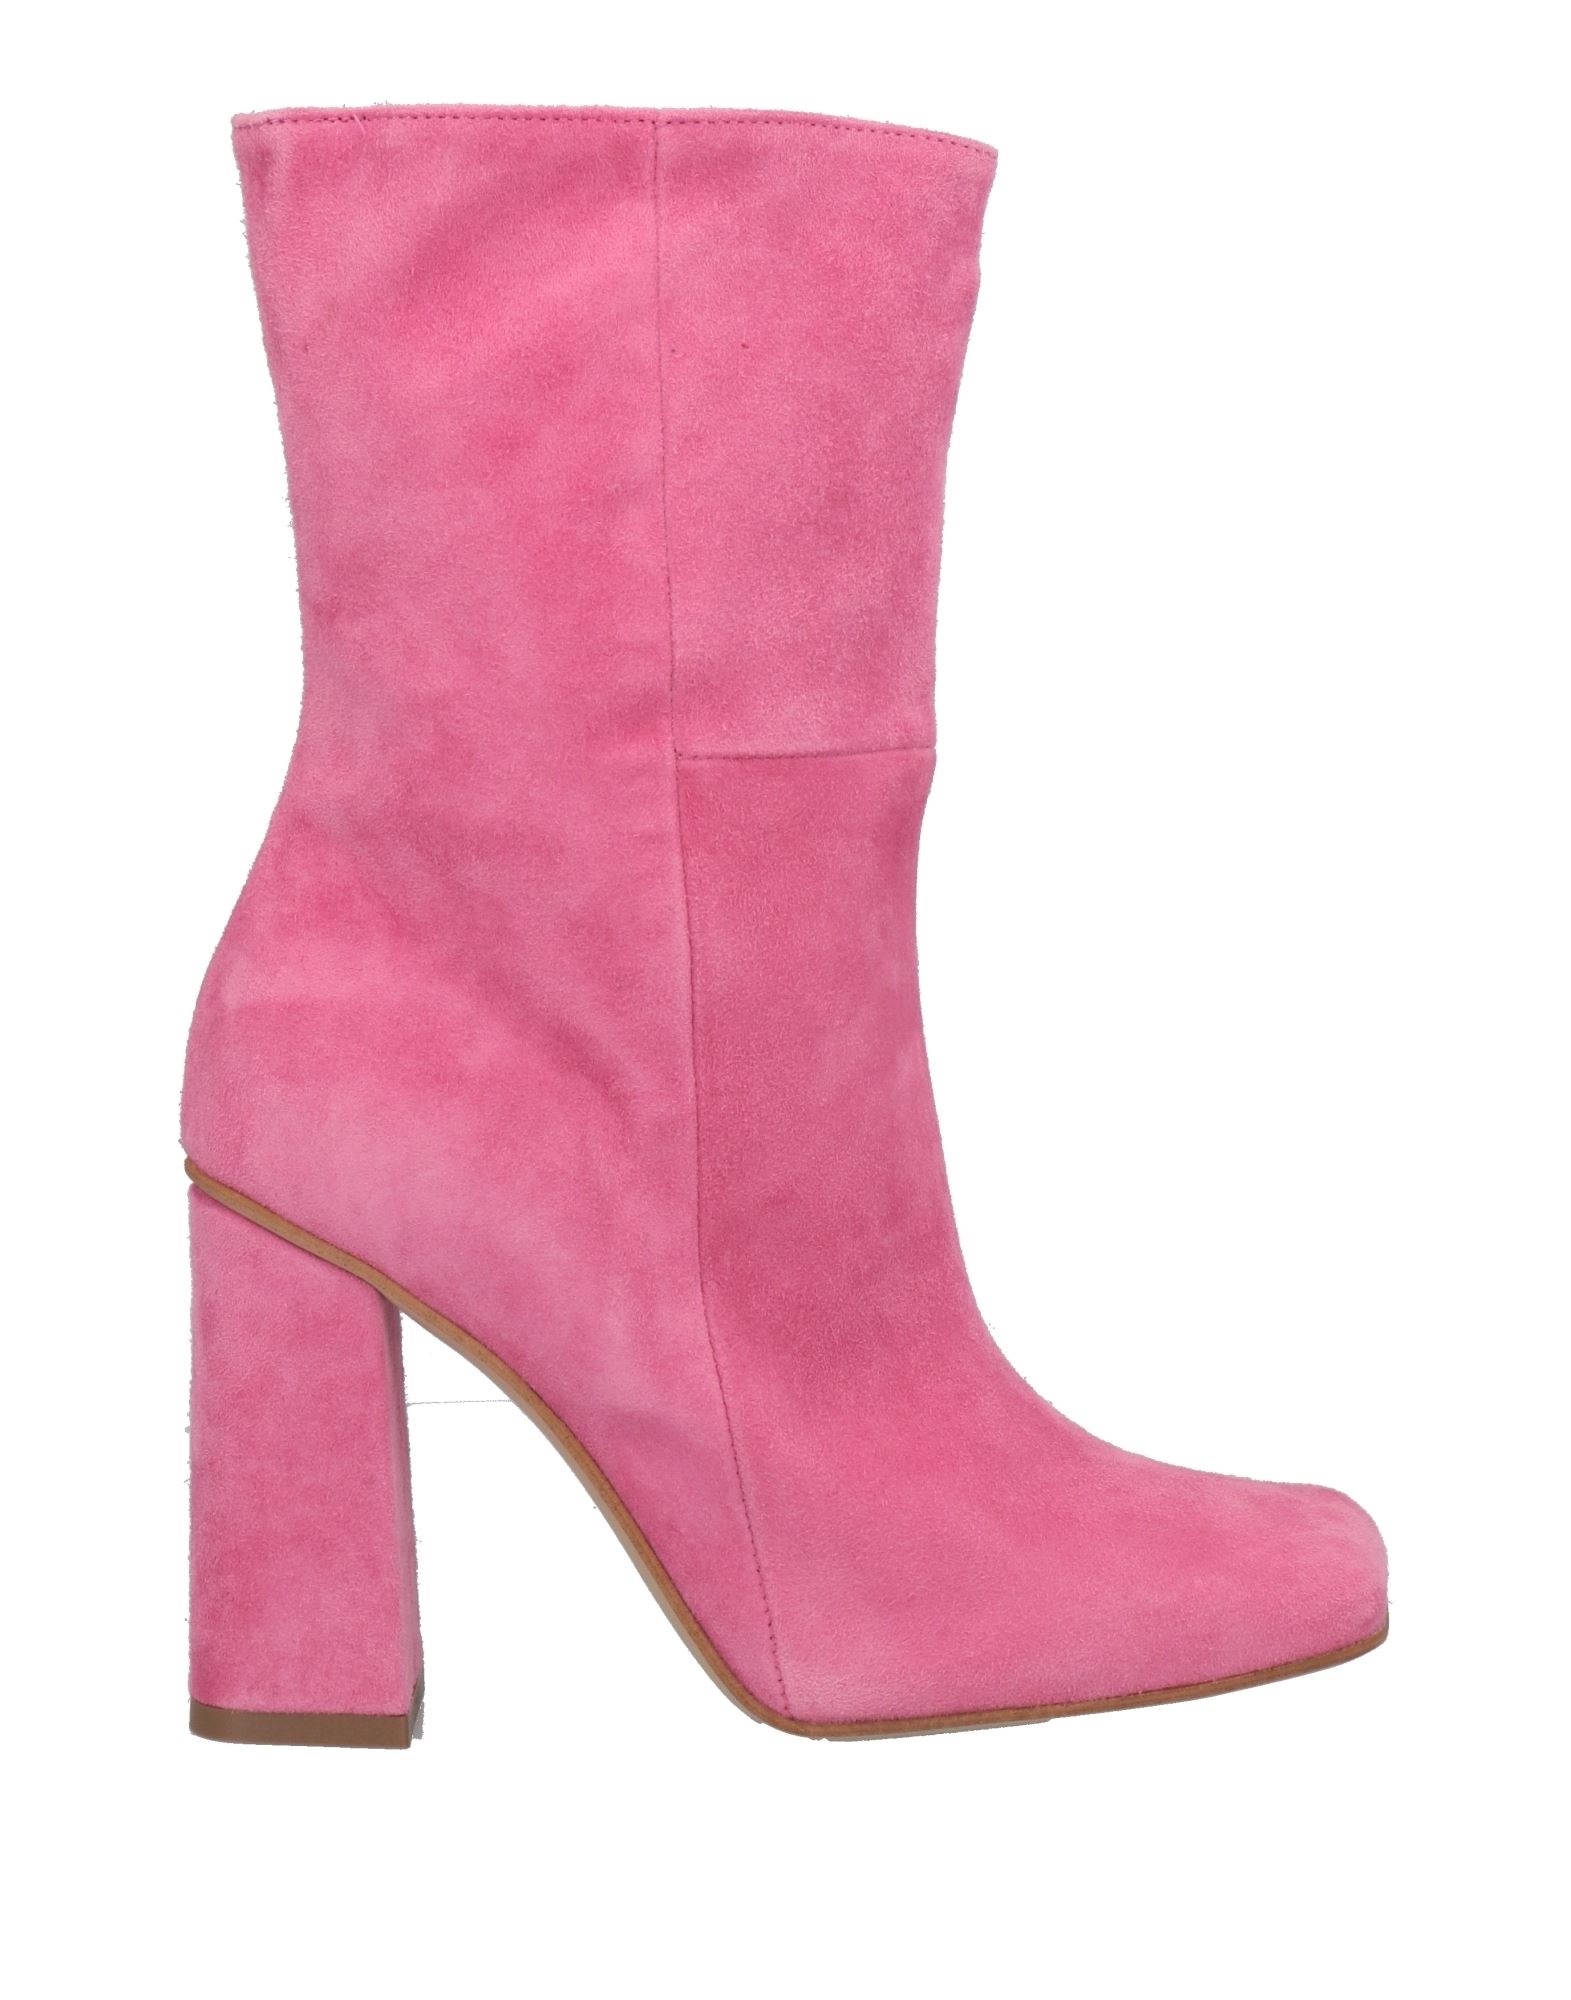 Carla G. Ankle Boots In Pink